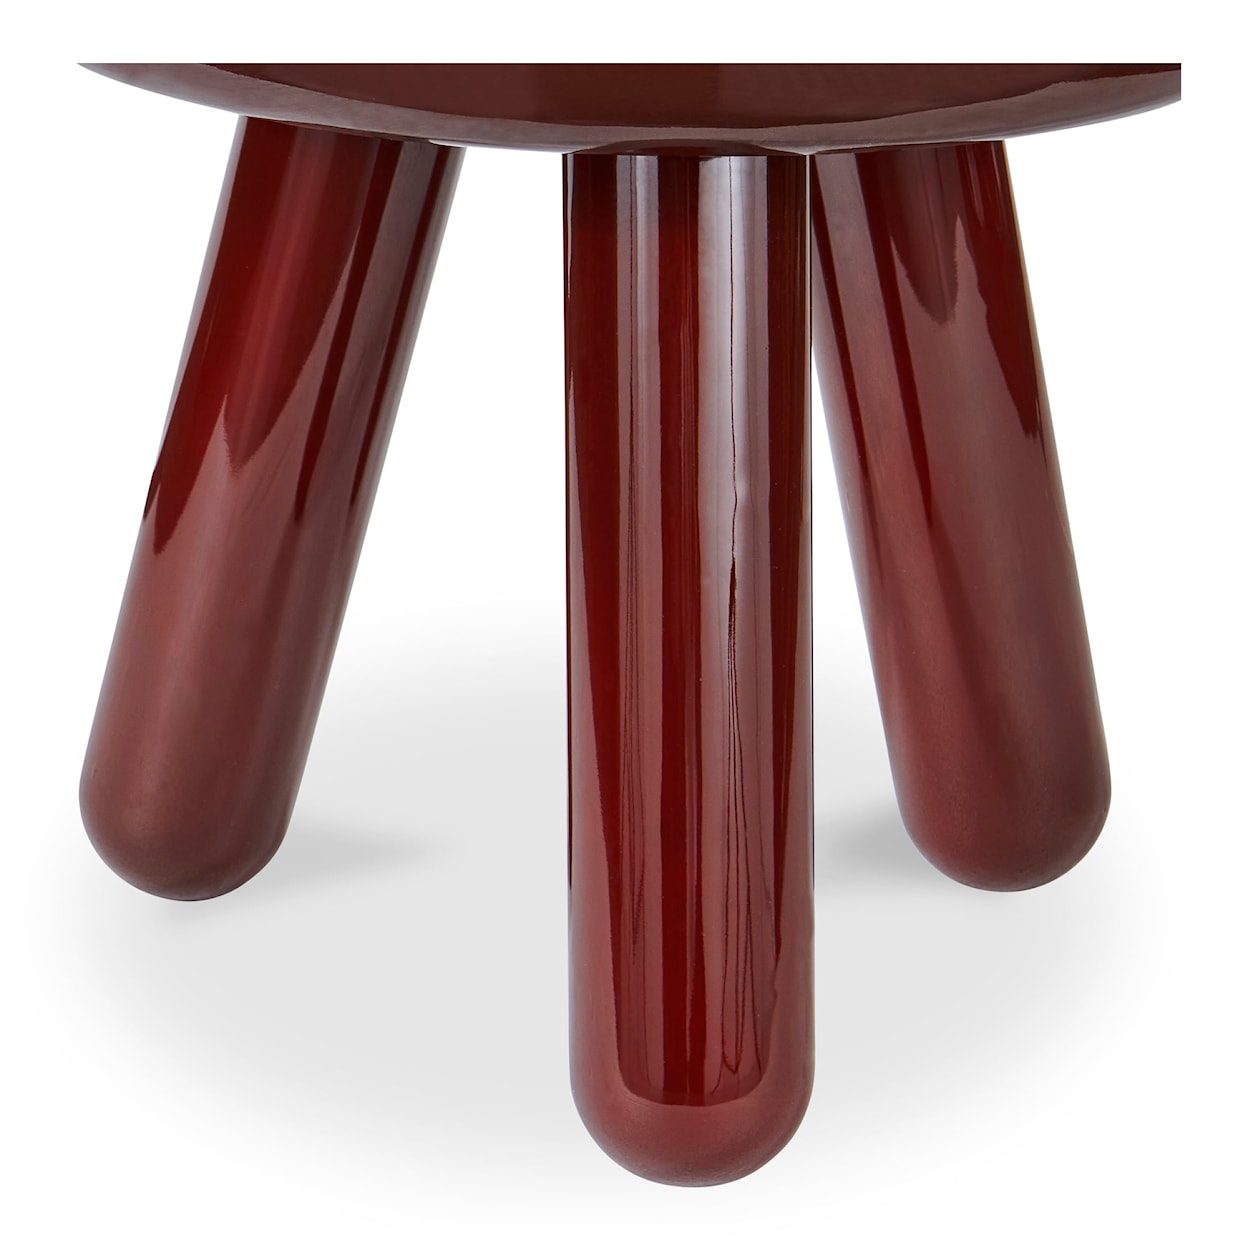 Moe's Home Collection Joy Accent Table